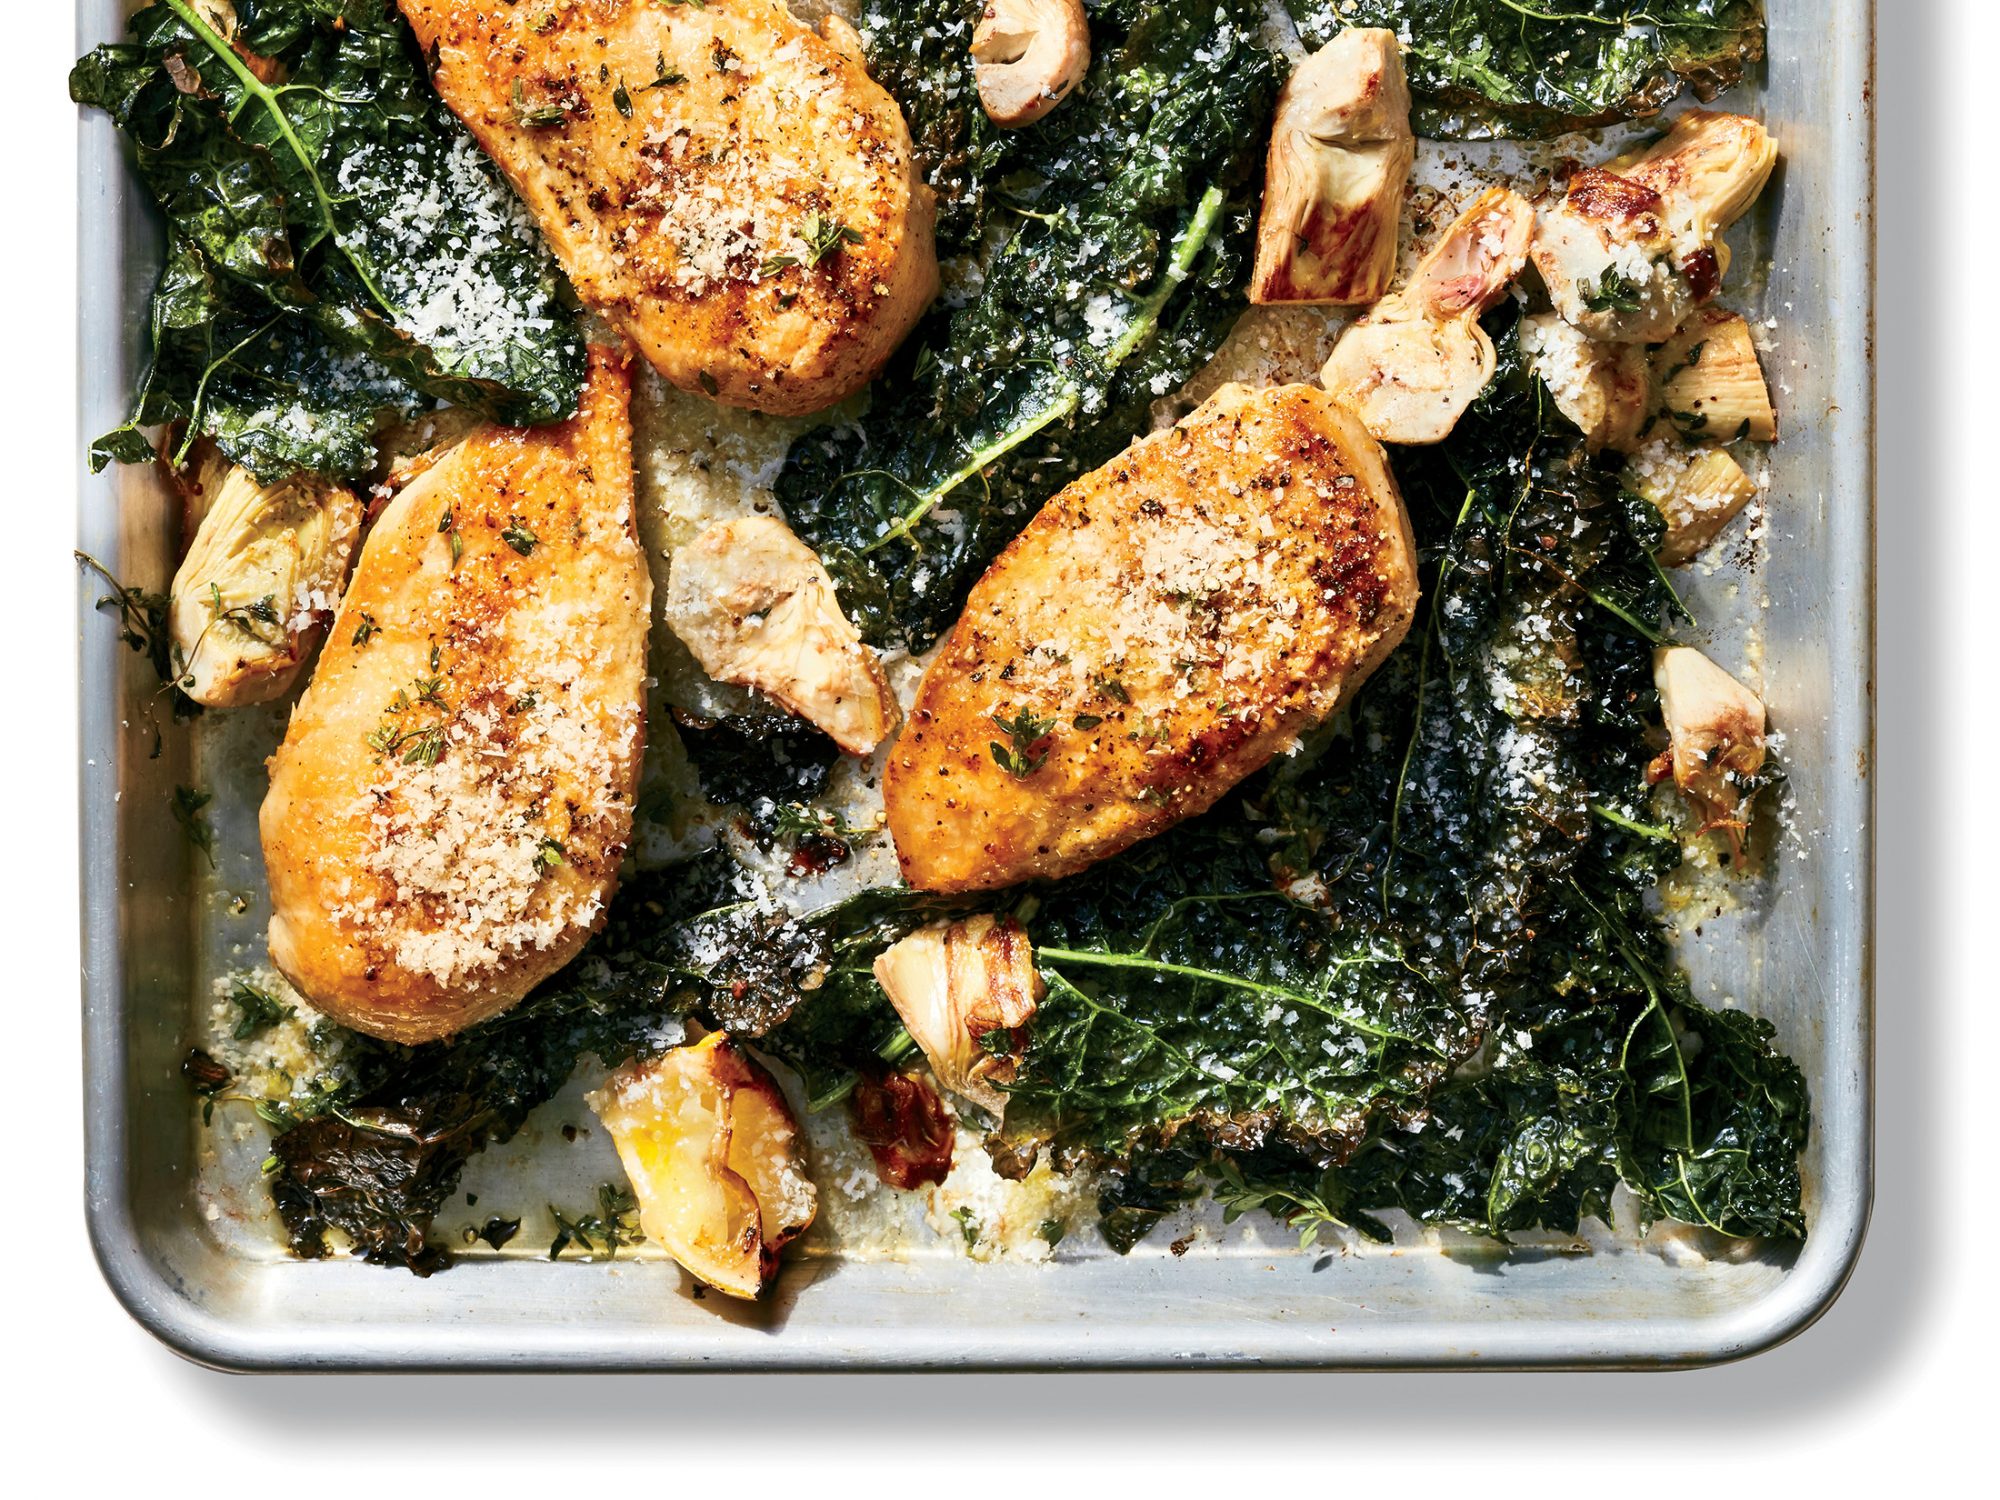 Lemon Chicken with Artichokes and Kale